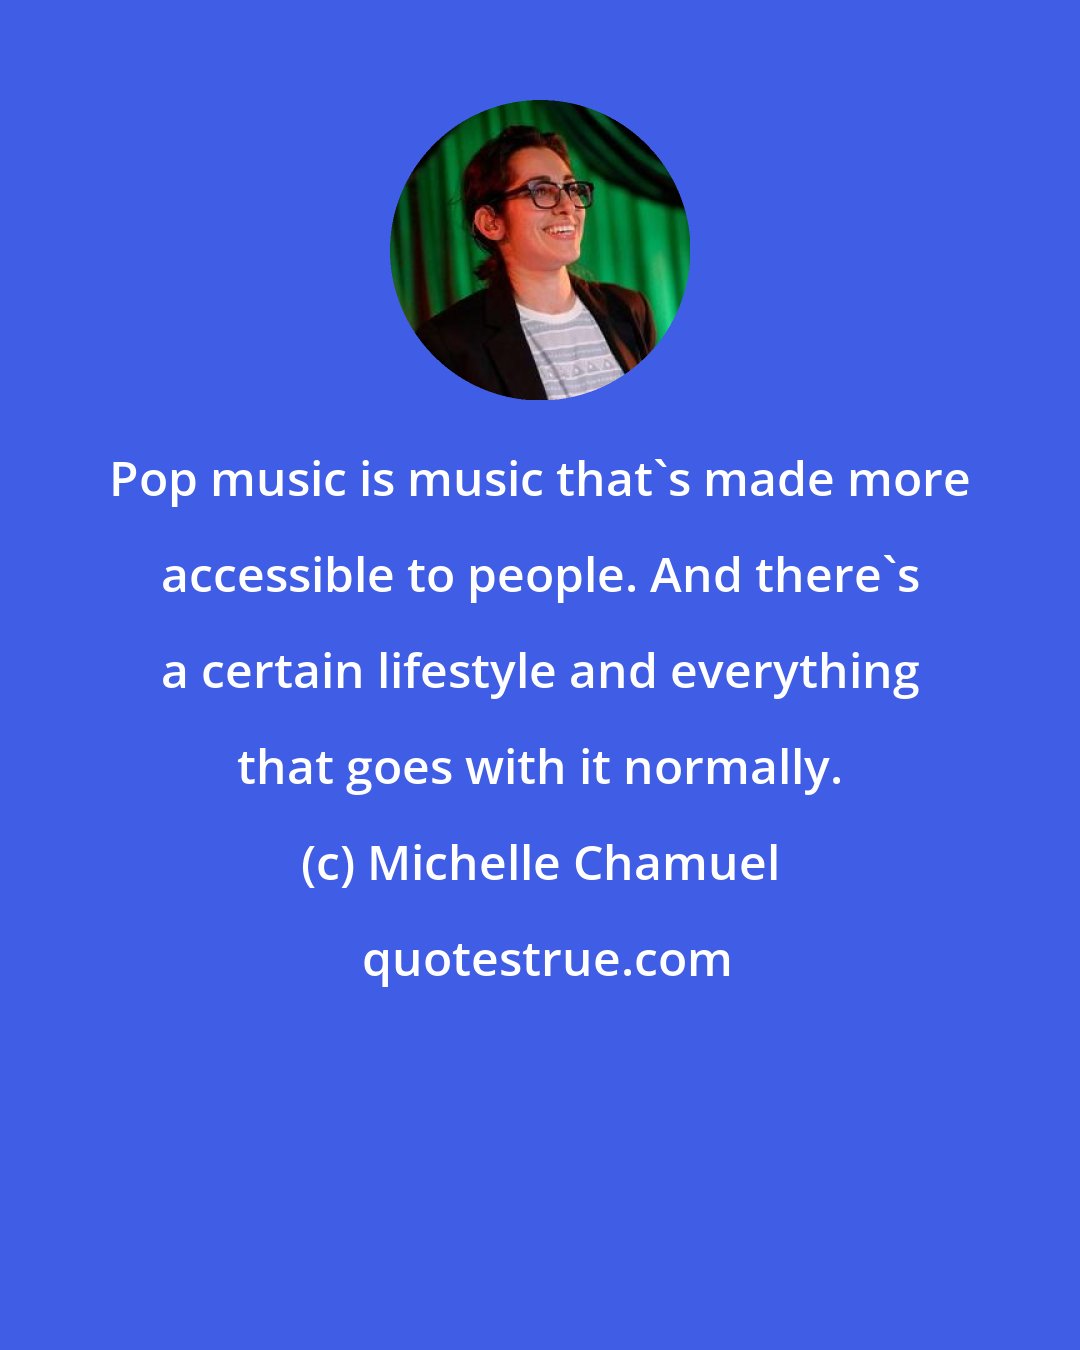 Michelle Chamuel: Pop music is music that's made more accessible to people. And there's a certain lifestyle and everything that goes with it normally.